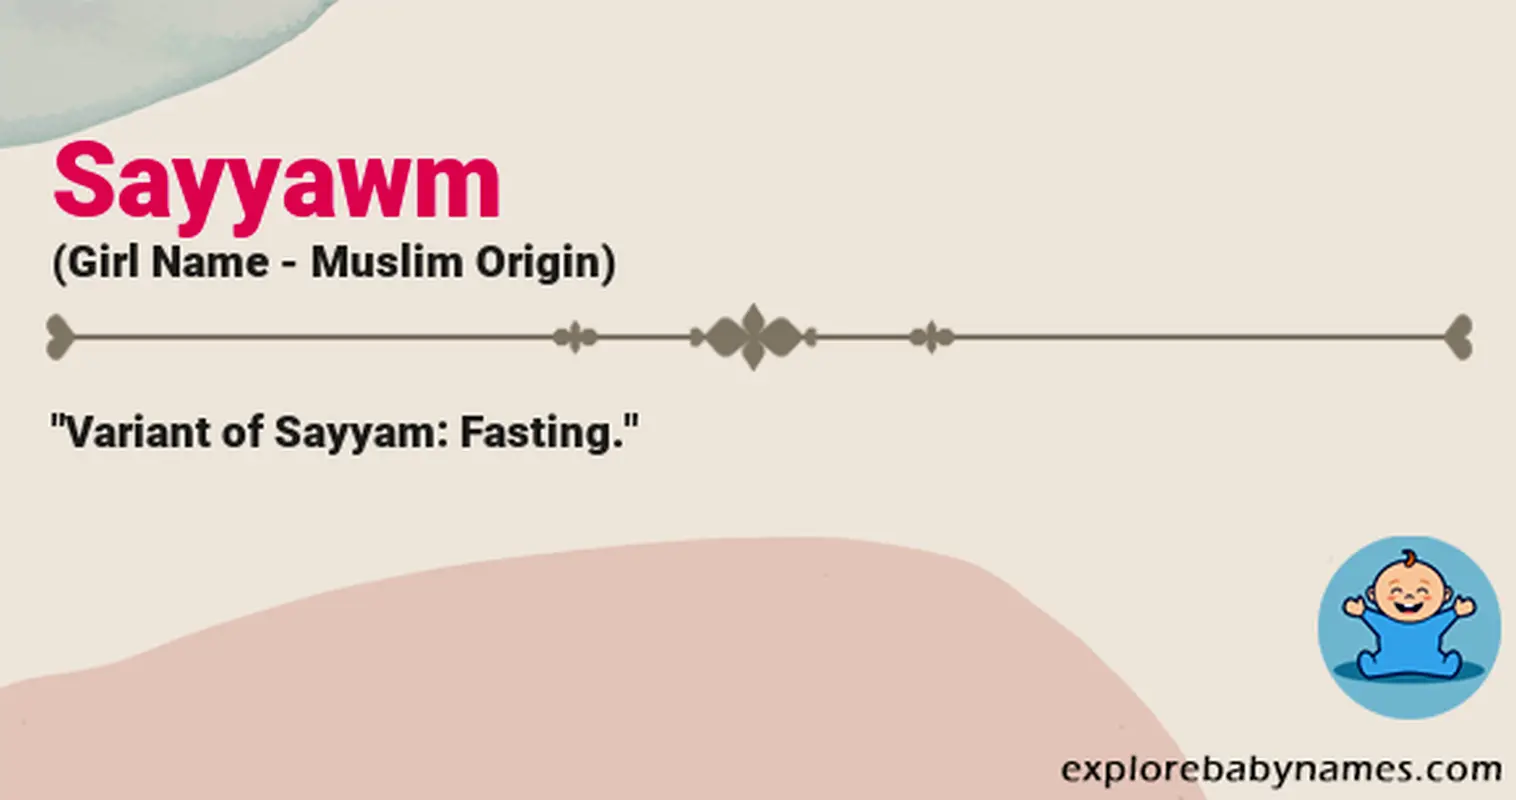 Meaning of Sayyawm